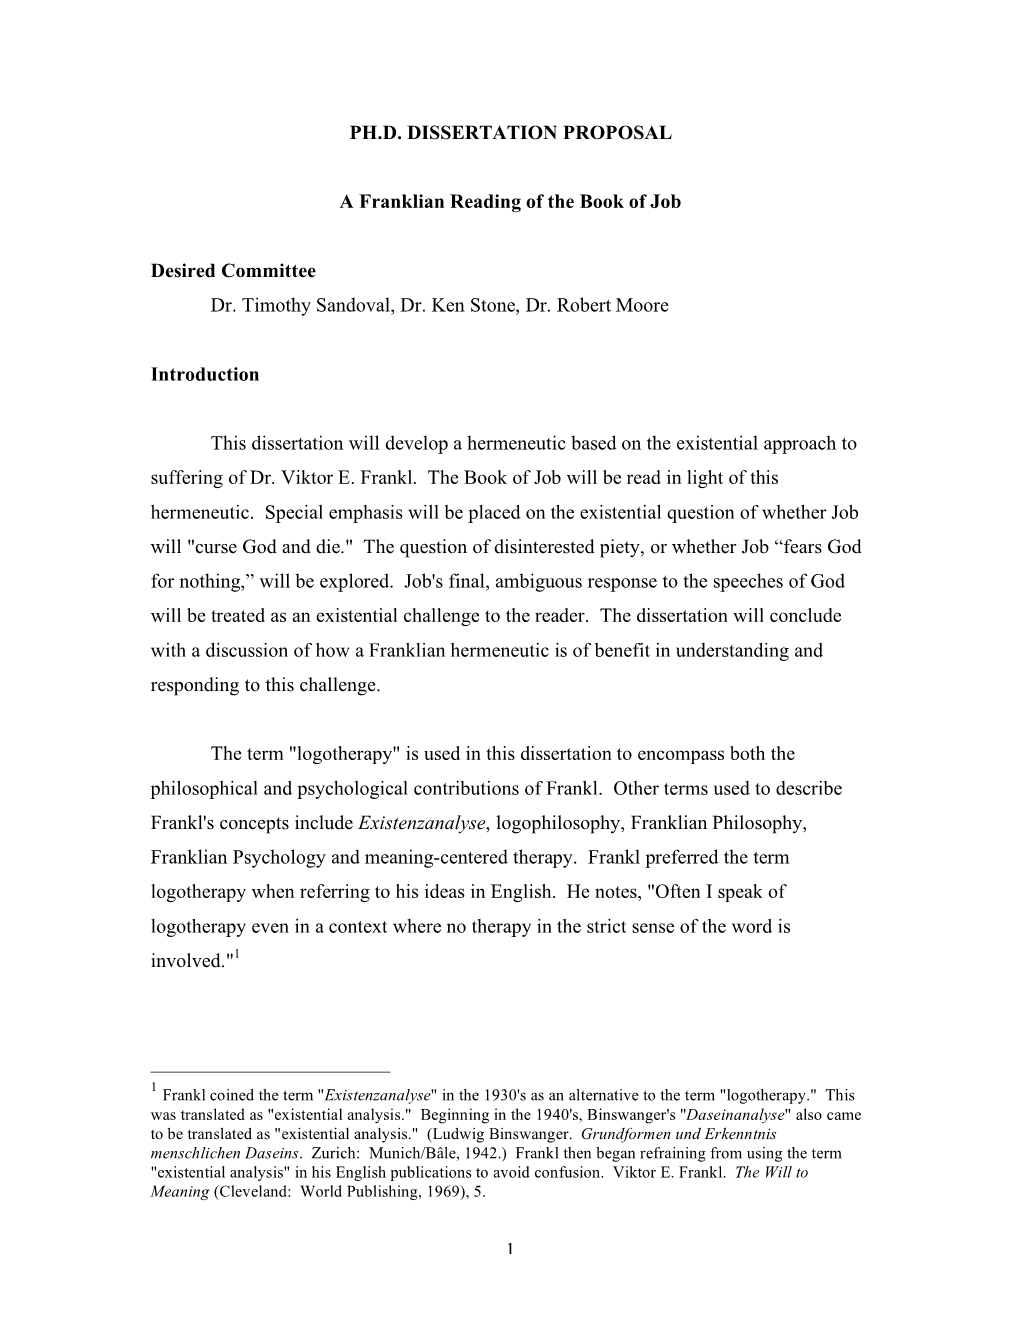 1 PH.D. DISSERTATION PROPOSAL a Franklian Reading of the Book Of